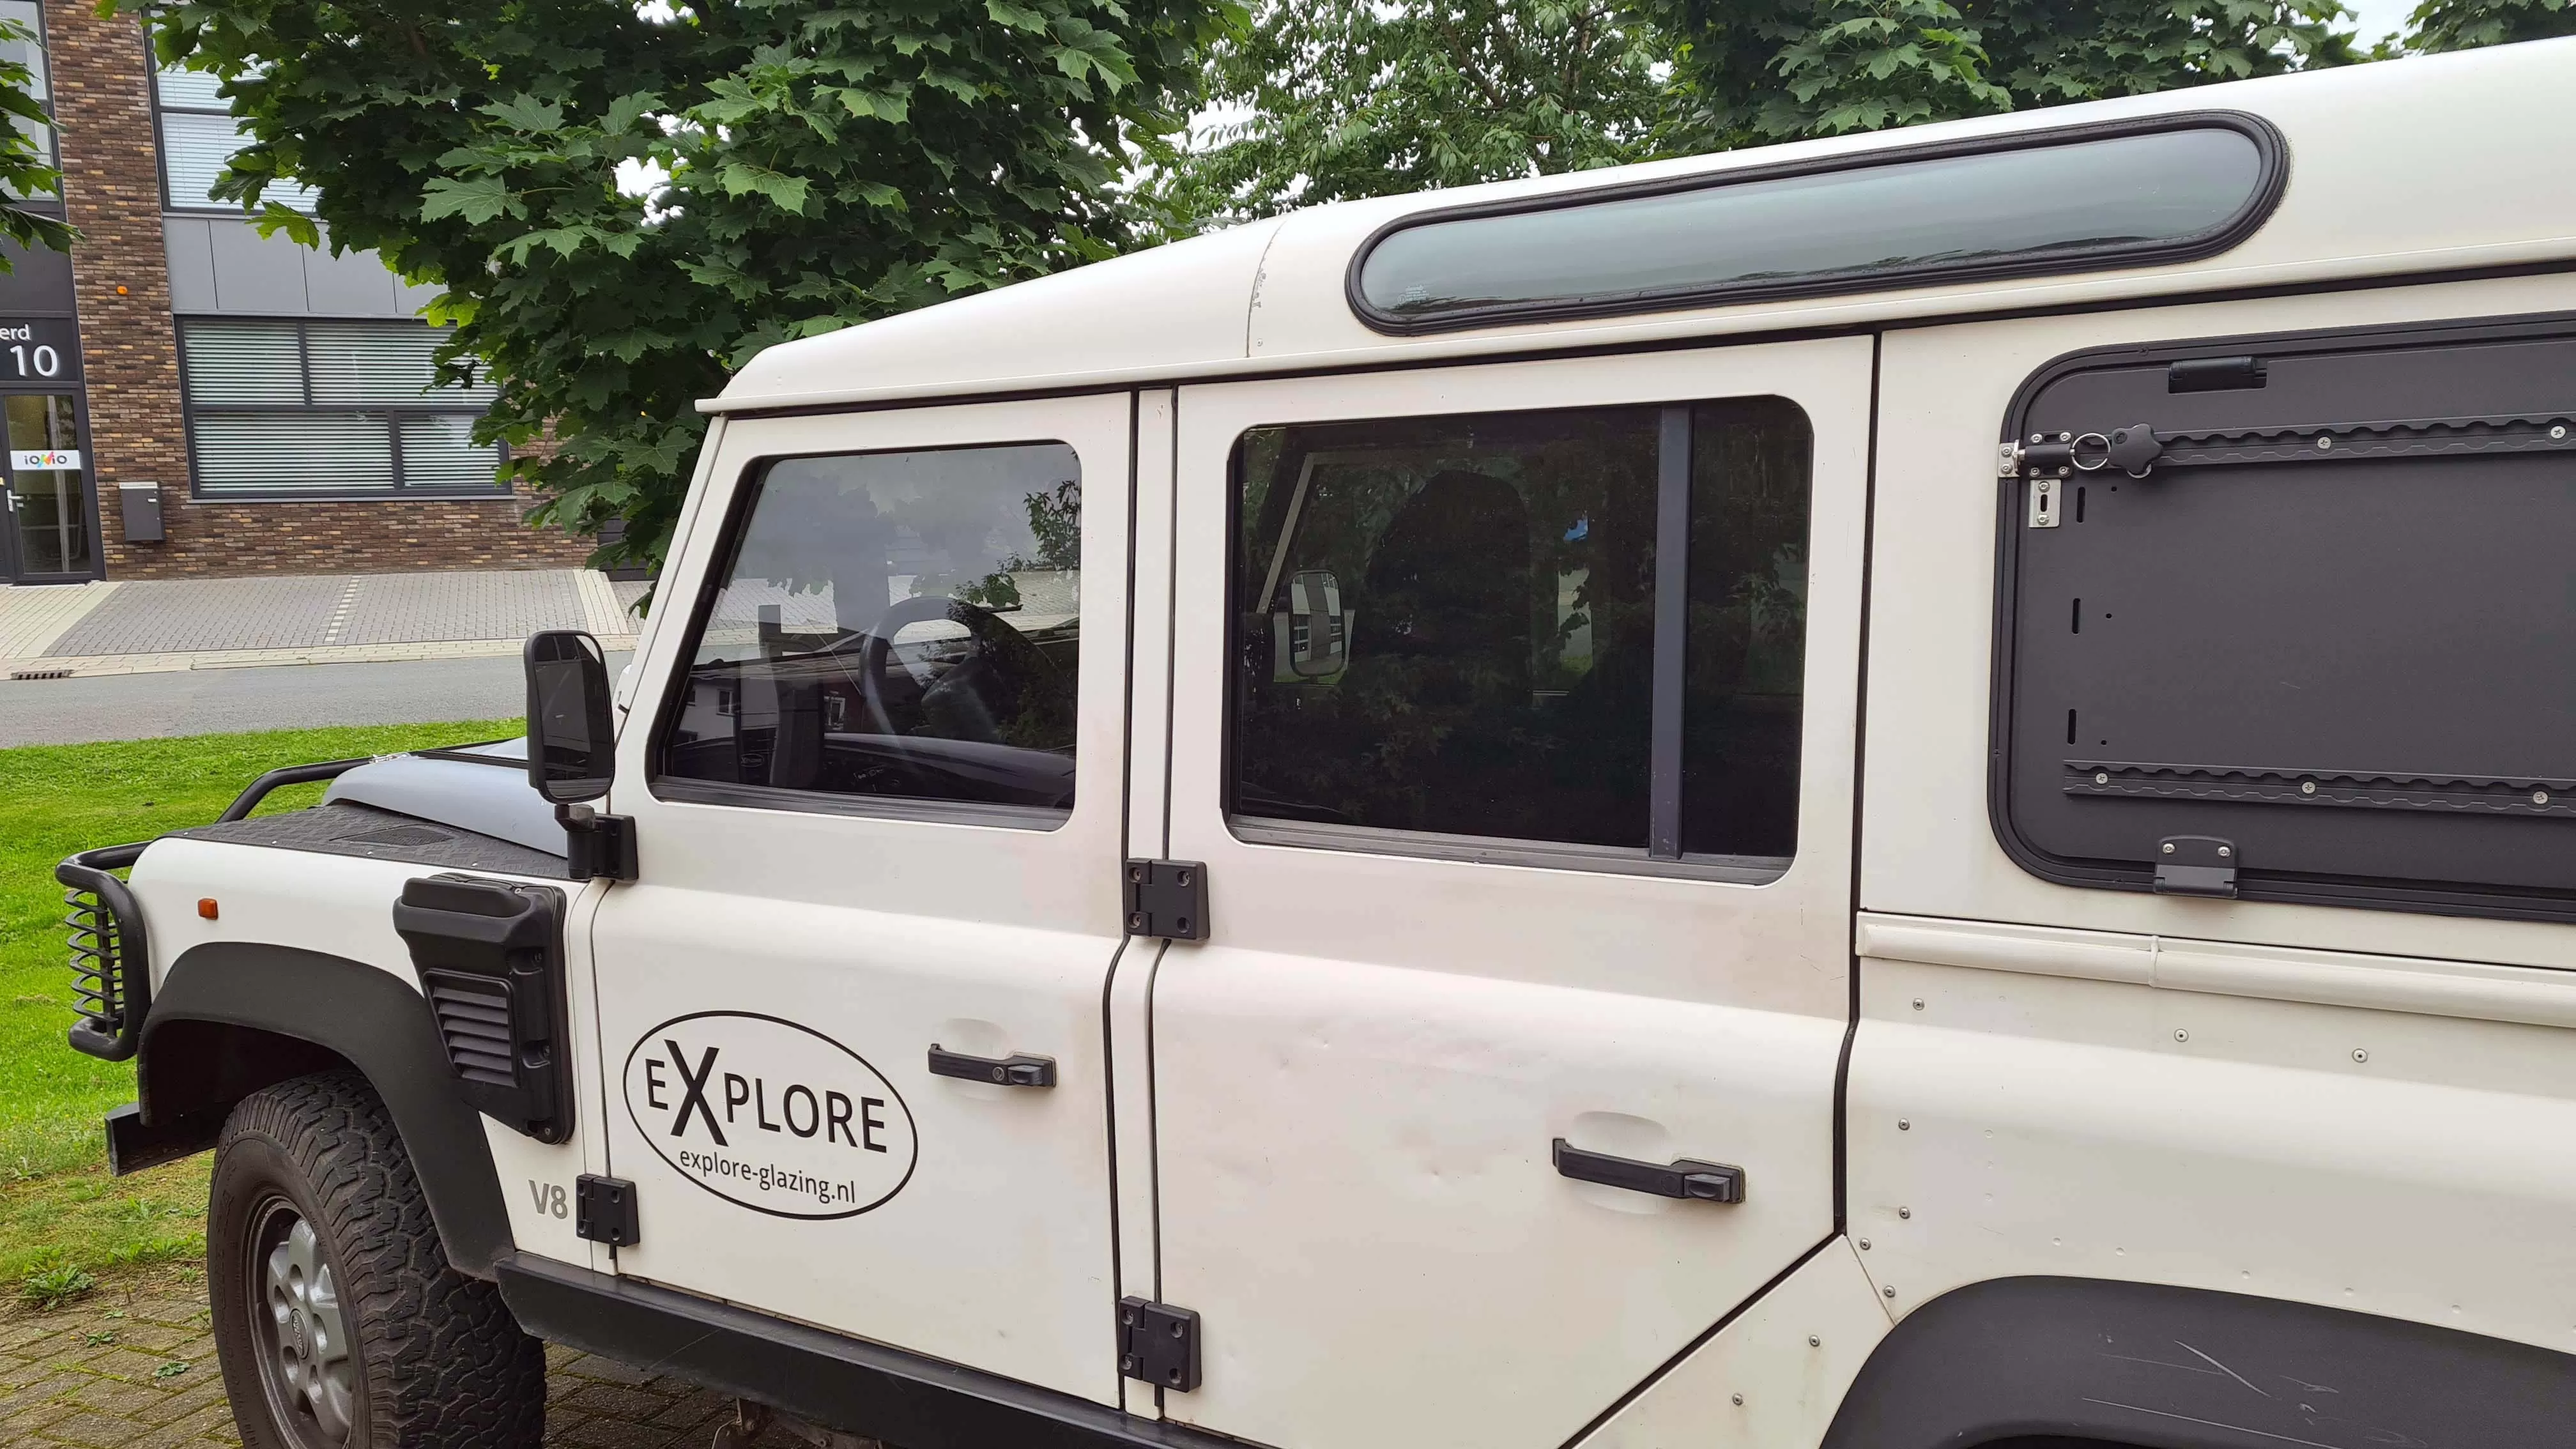 White Land Rover Defender with Explore Glazing branding and aftermarket window attachments.